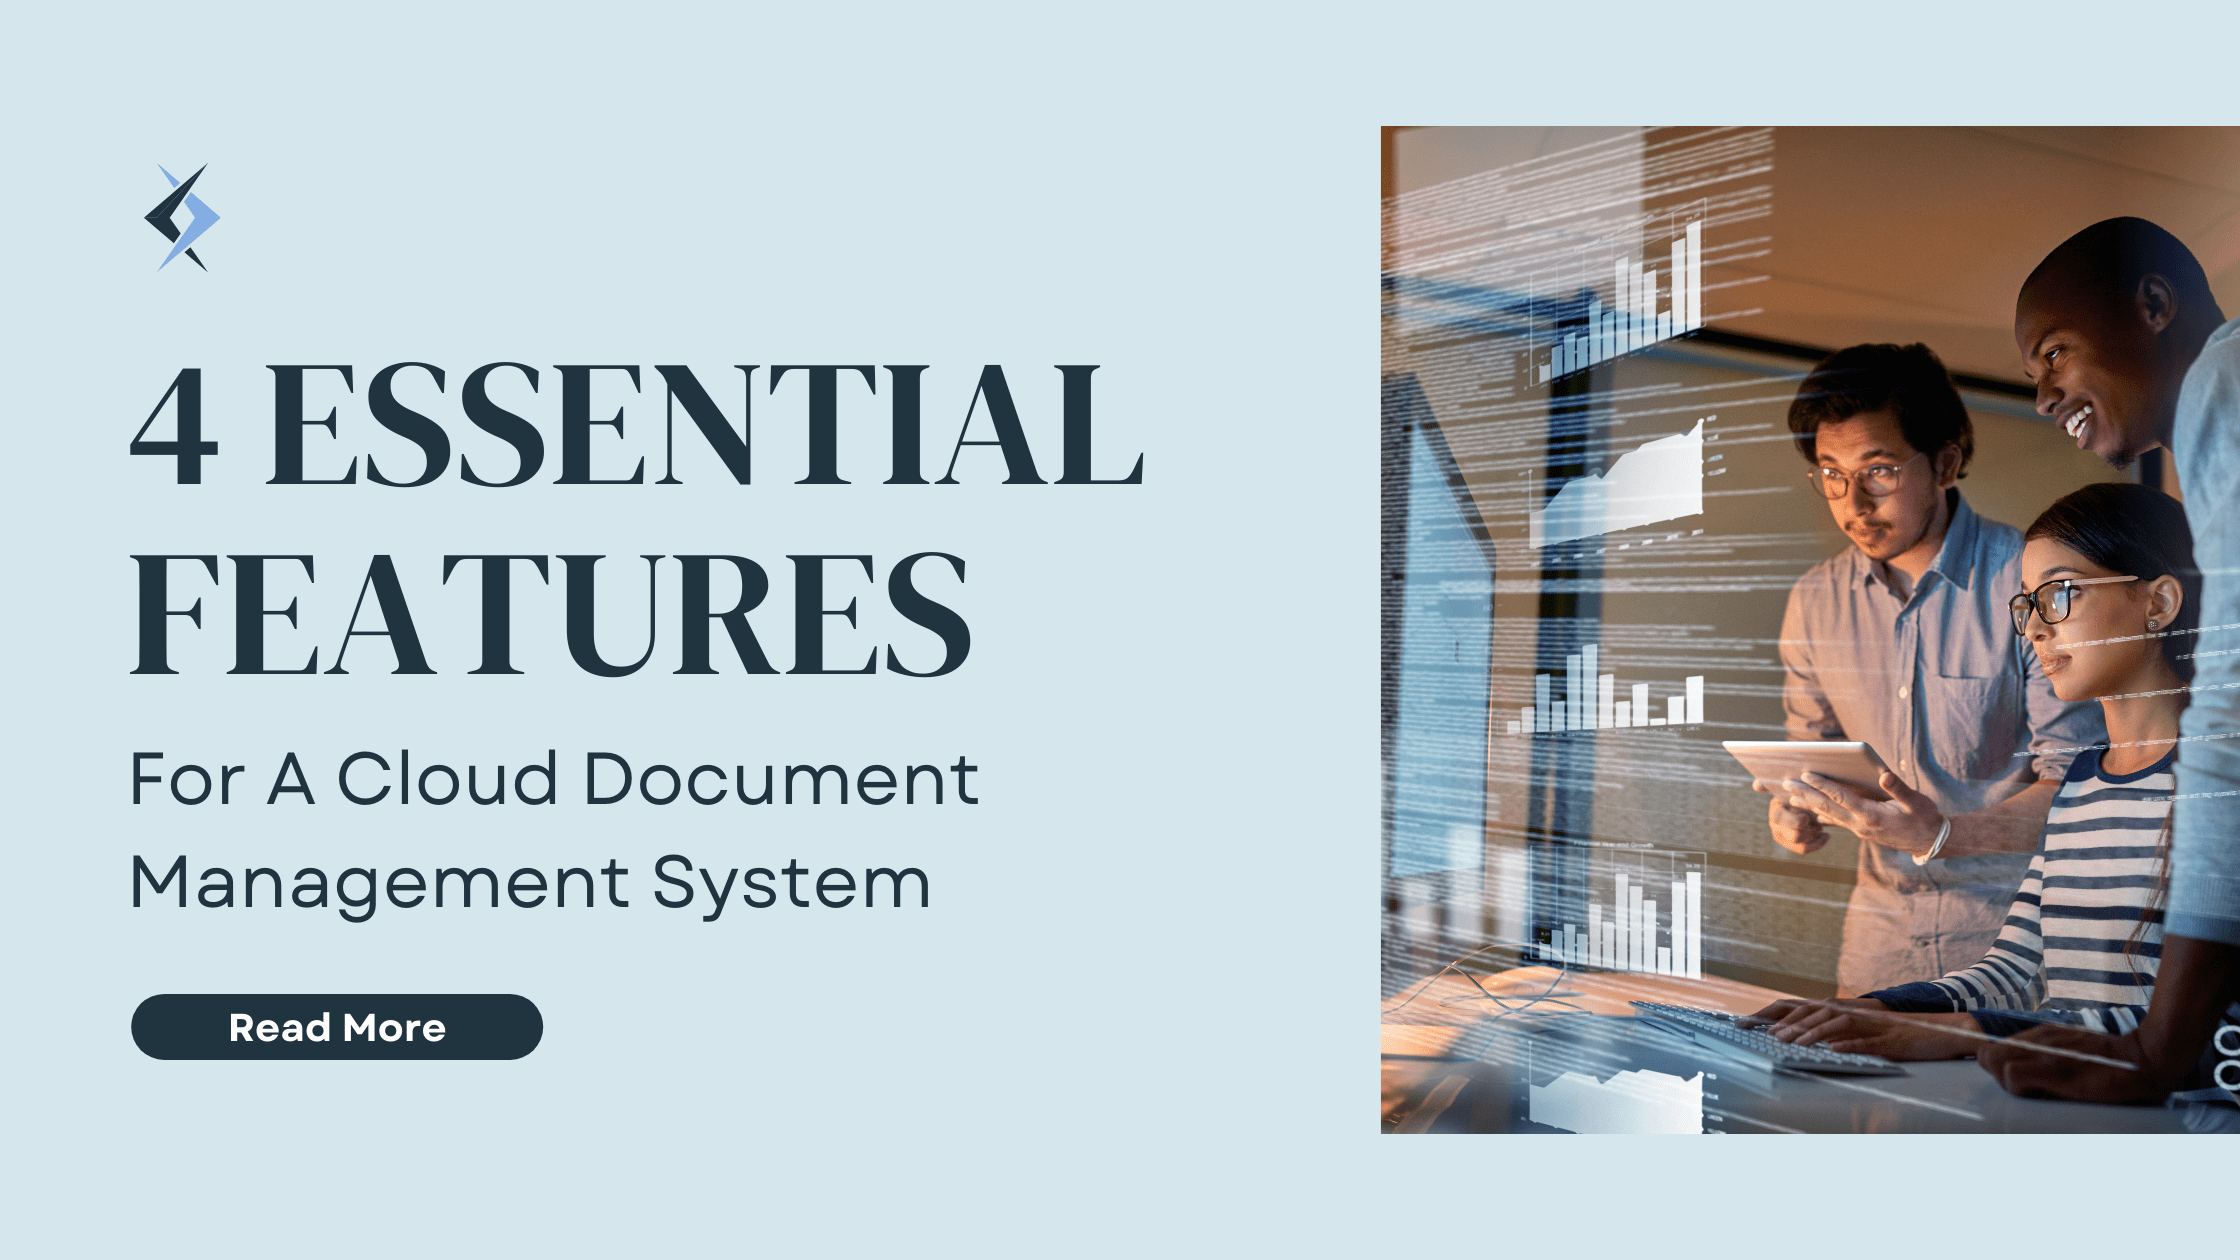 4 Essential Features You Need To Look For In A Cloud Document Management System